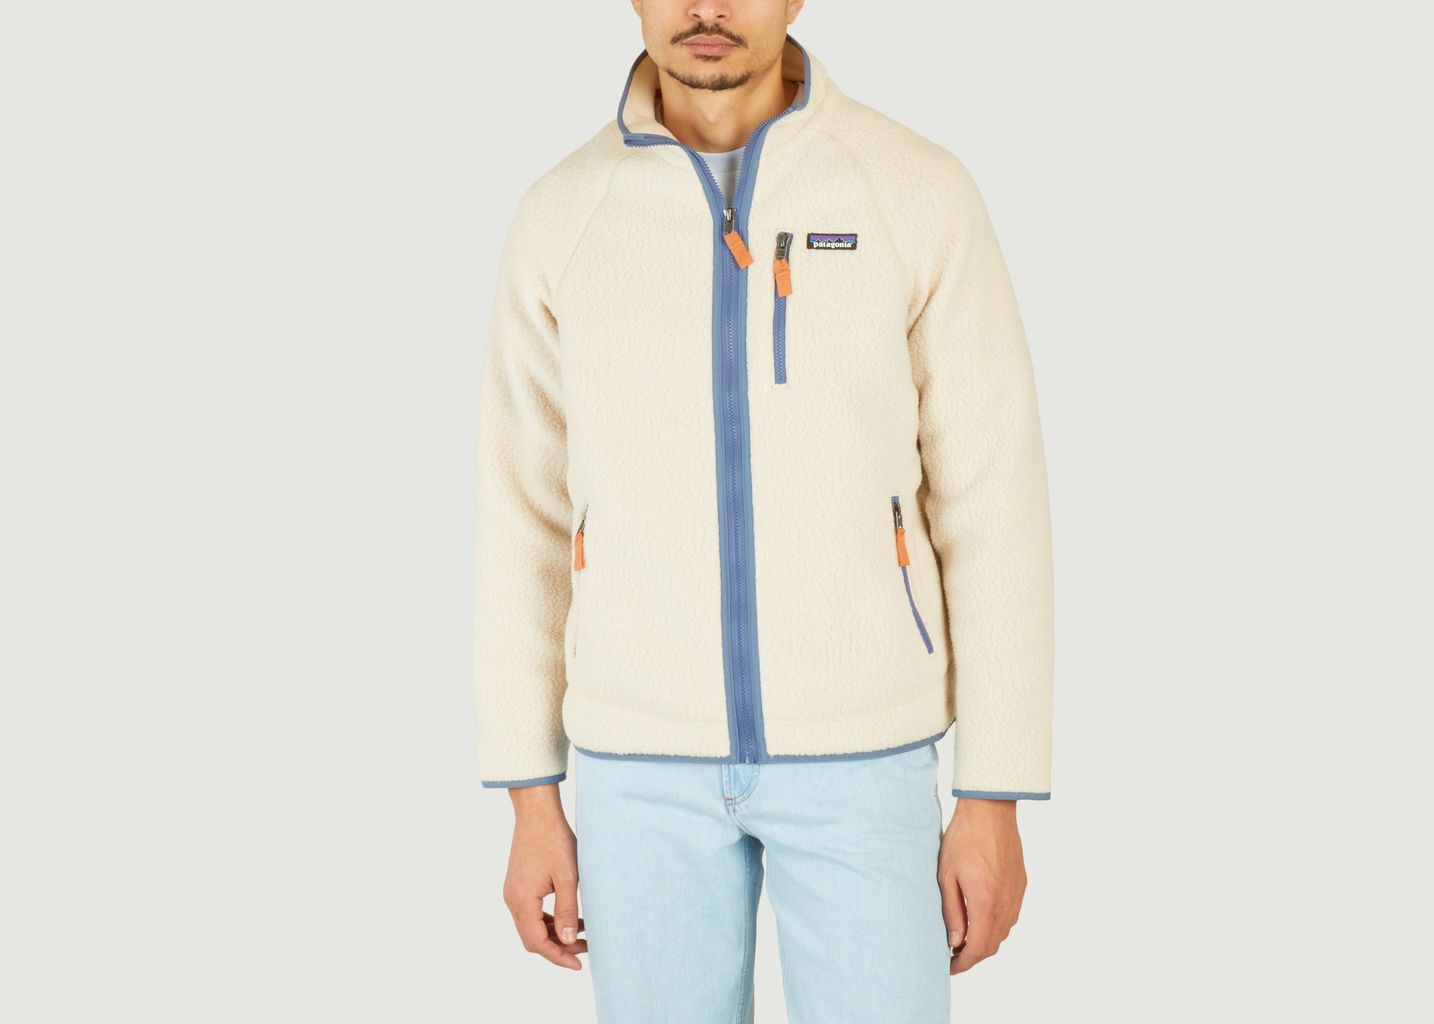 Zipped fleece with stand-up collar - Patagonia